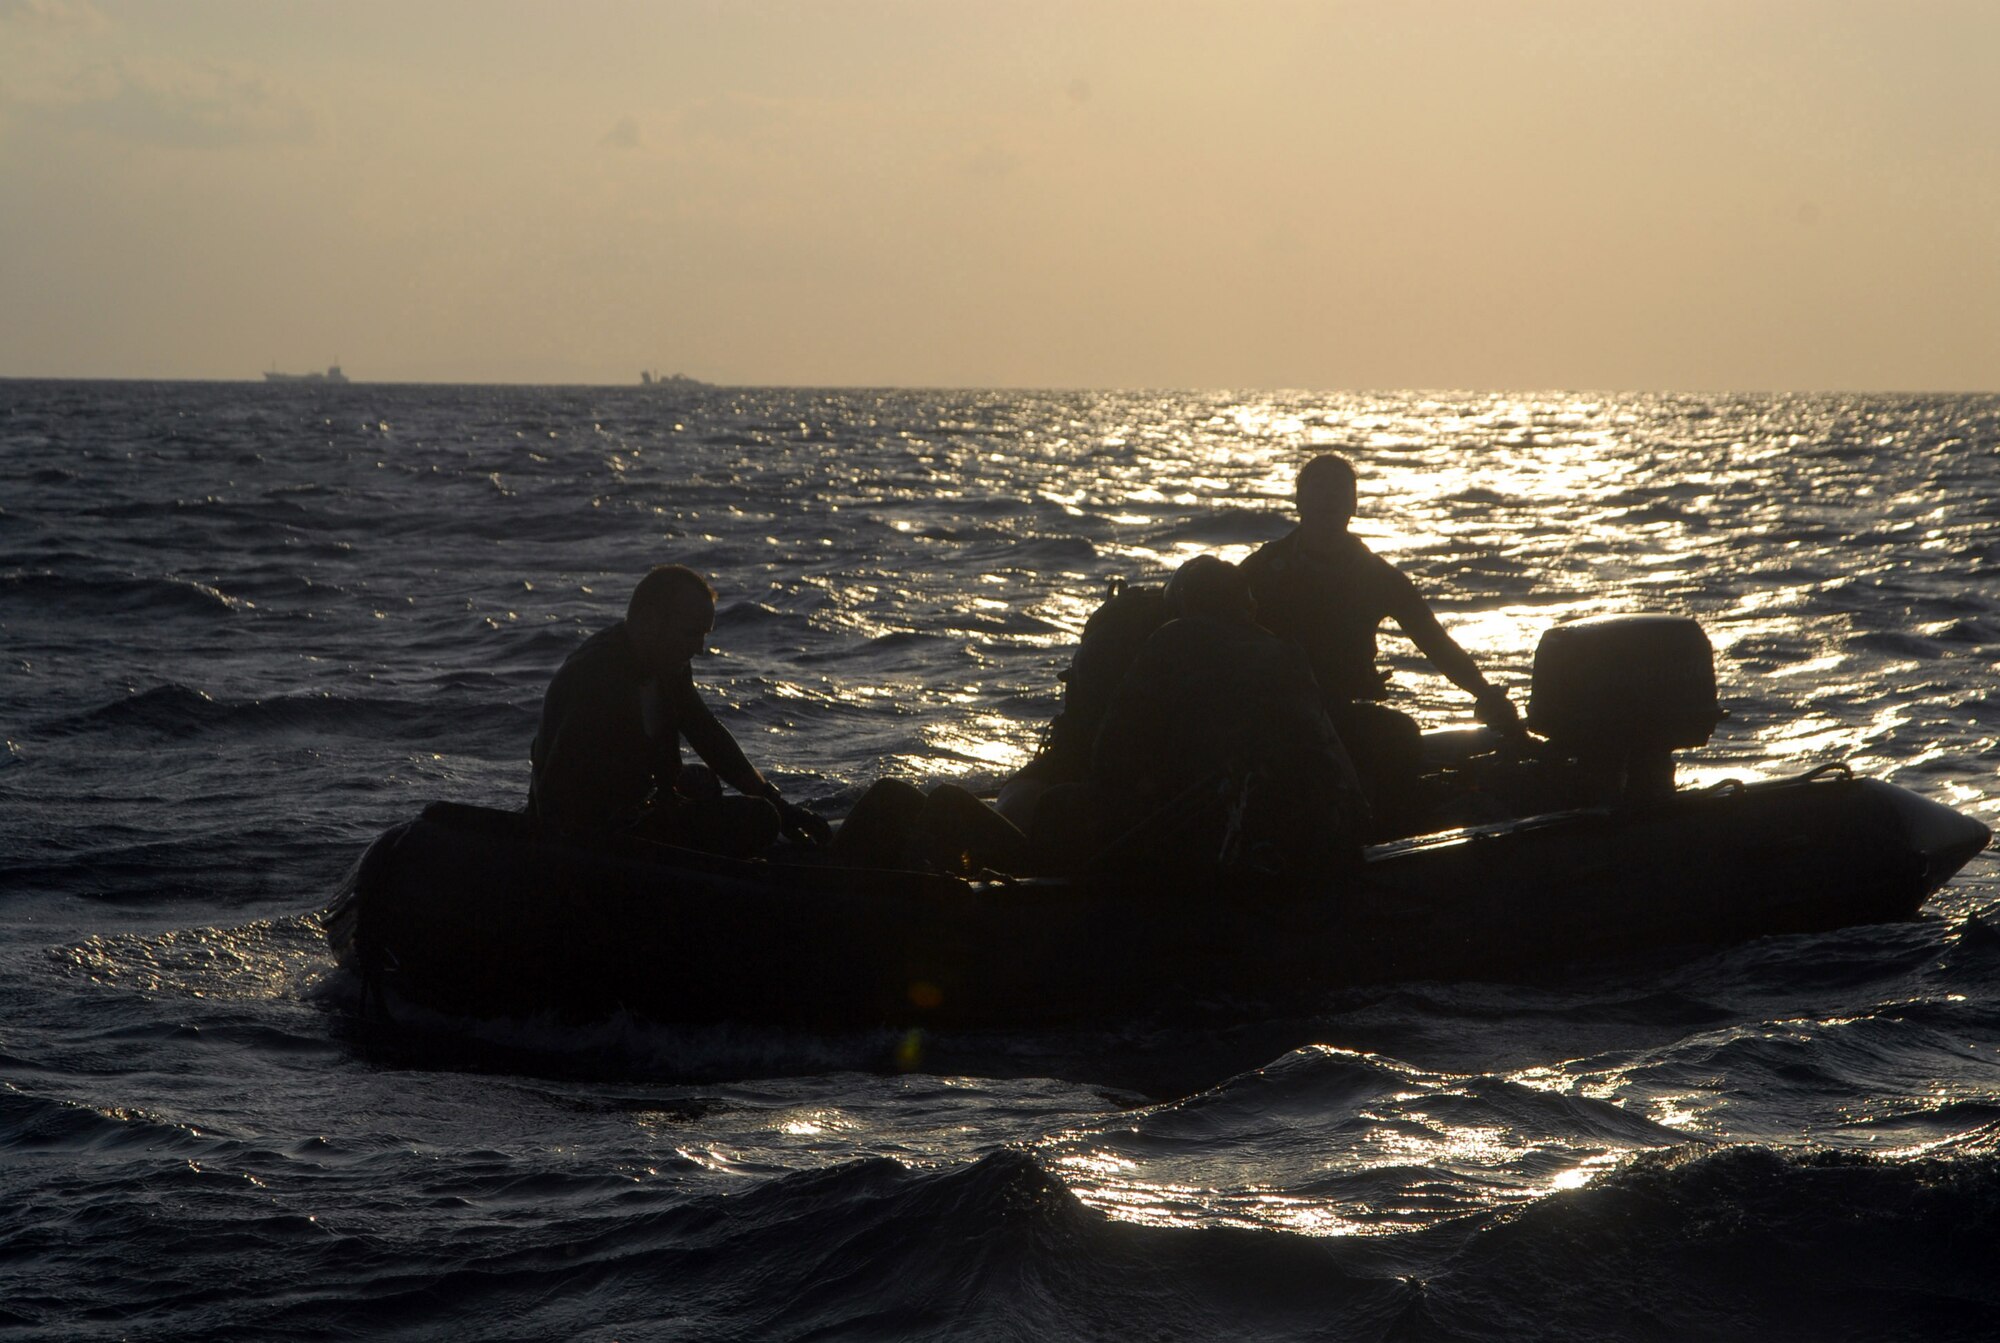 Pararescuemen of the 31st Rescue Squadron perform water rescue training using an inflatable Zodiac boat in the waters off of Kadena Air Base, Japan Oct. 24, 2007. (U.S. Air Force photo/Staff Sgt. Christopher Marasky) (Cleared by Master Sgt. Jeff Loftin)